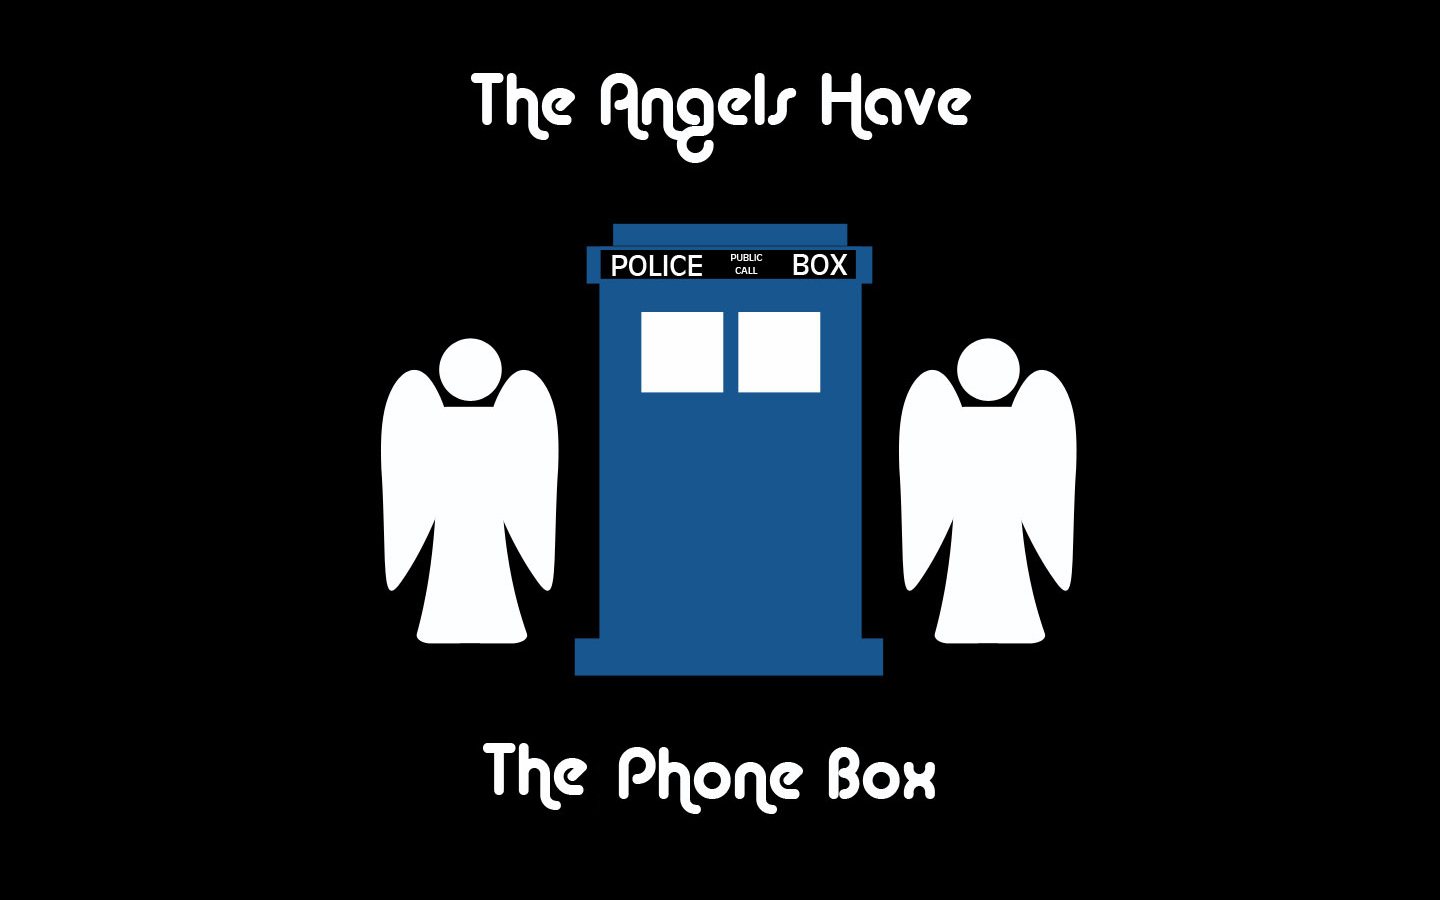 Wallpaper doctor who tardis weeping angels bbc police box (788951 ...